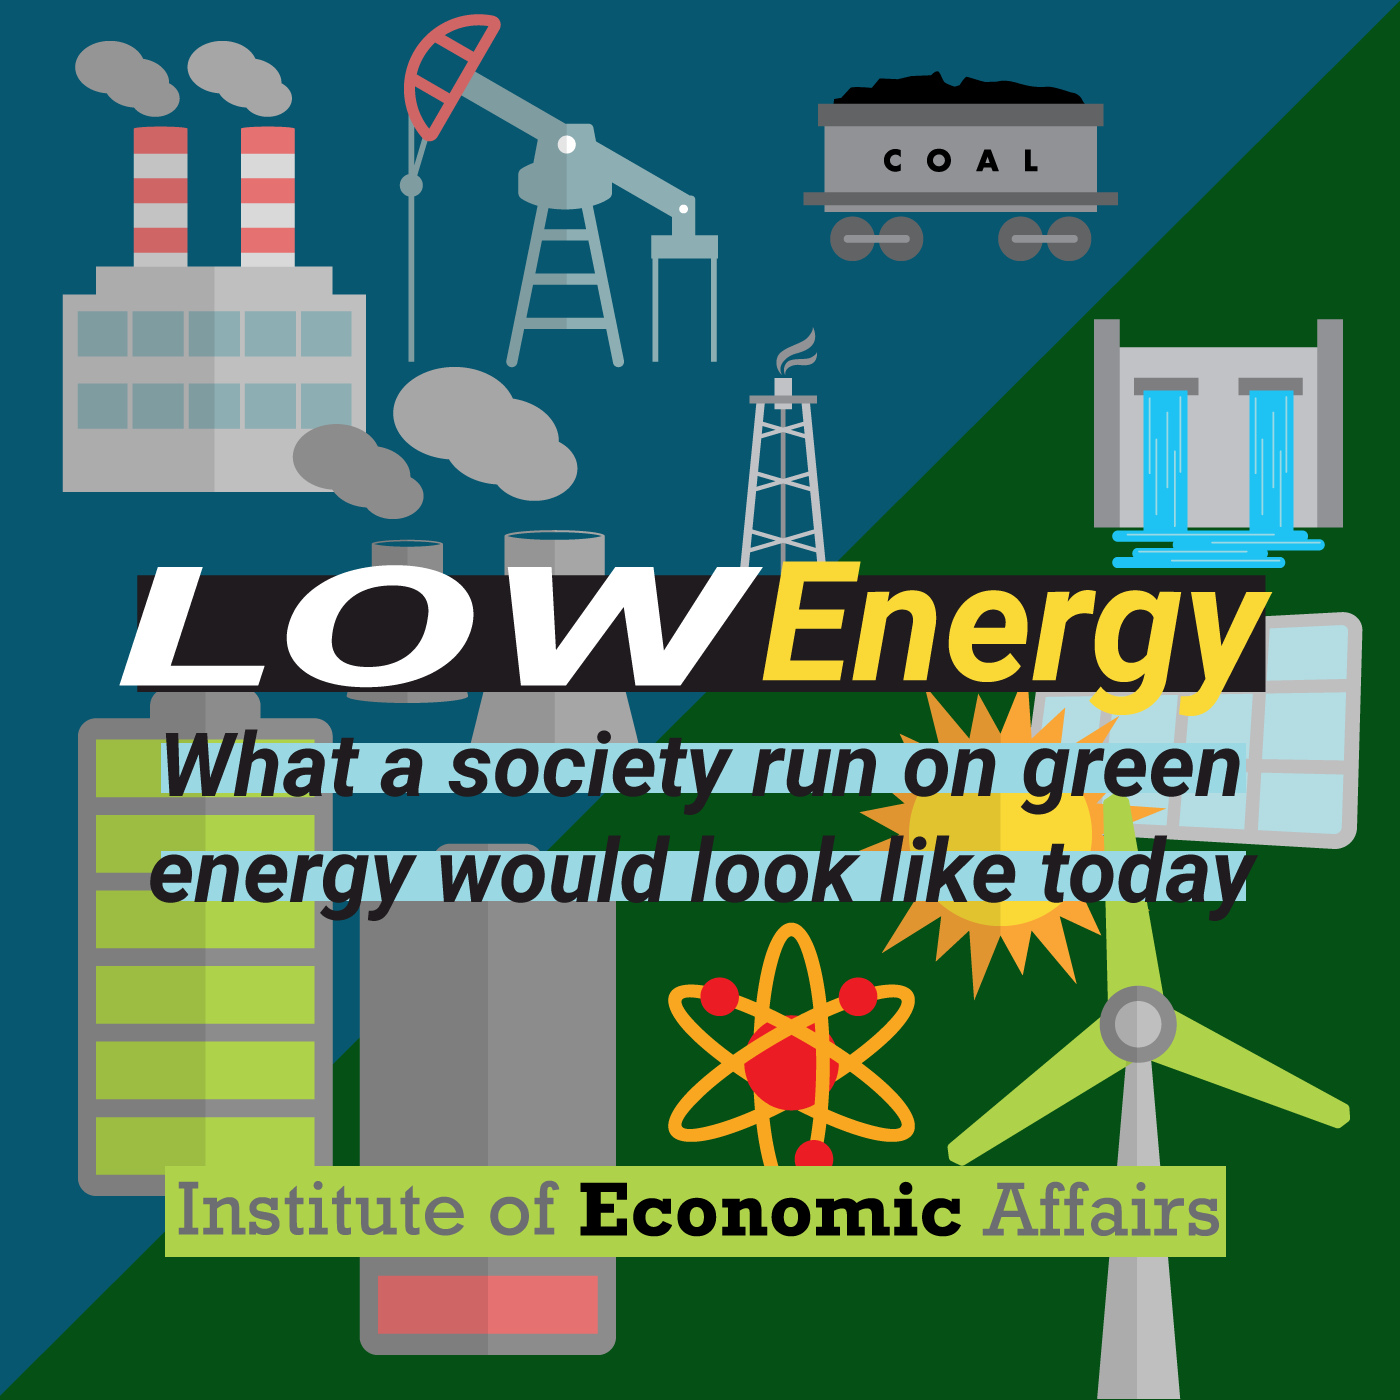 Low Energy - What a society run on green energy would look like today